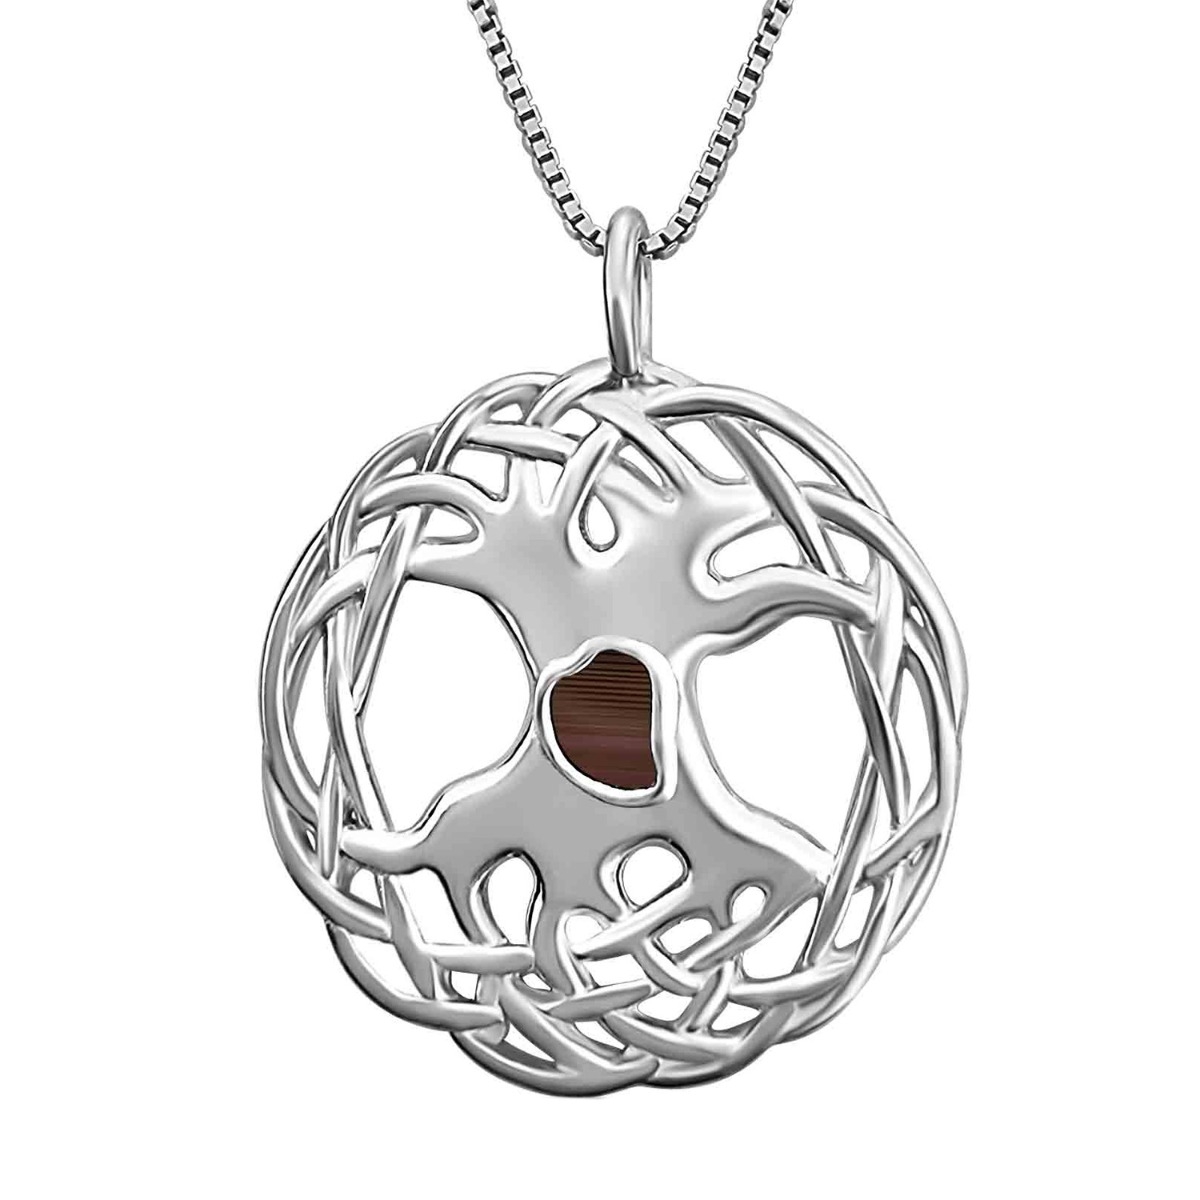 Round Overlapping Tree of Life Necklace with Micro-Inscribed Bible Chip - Color Option - 1